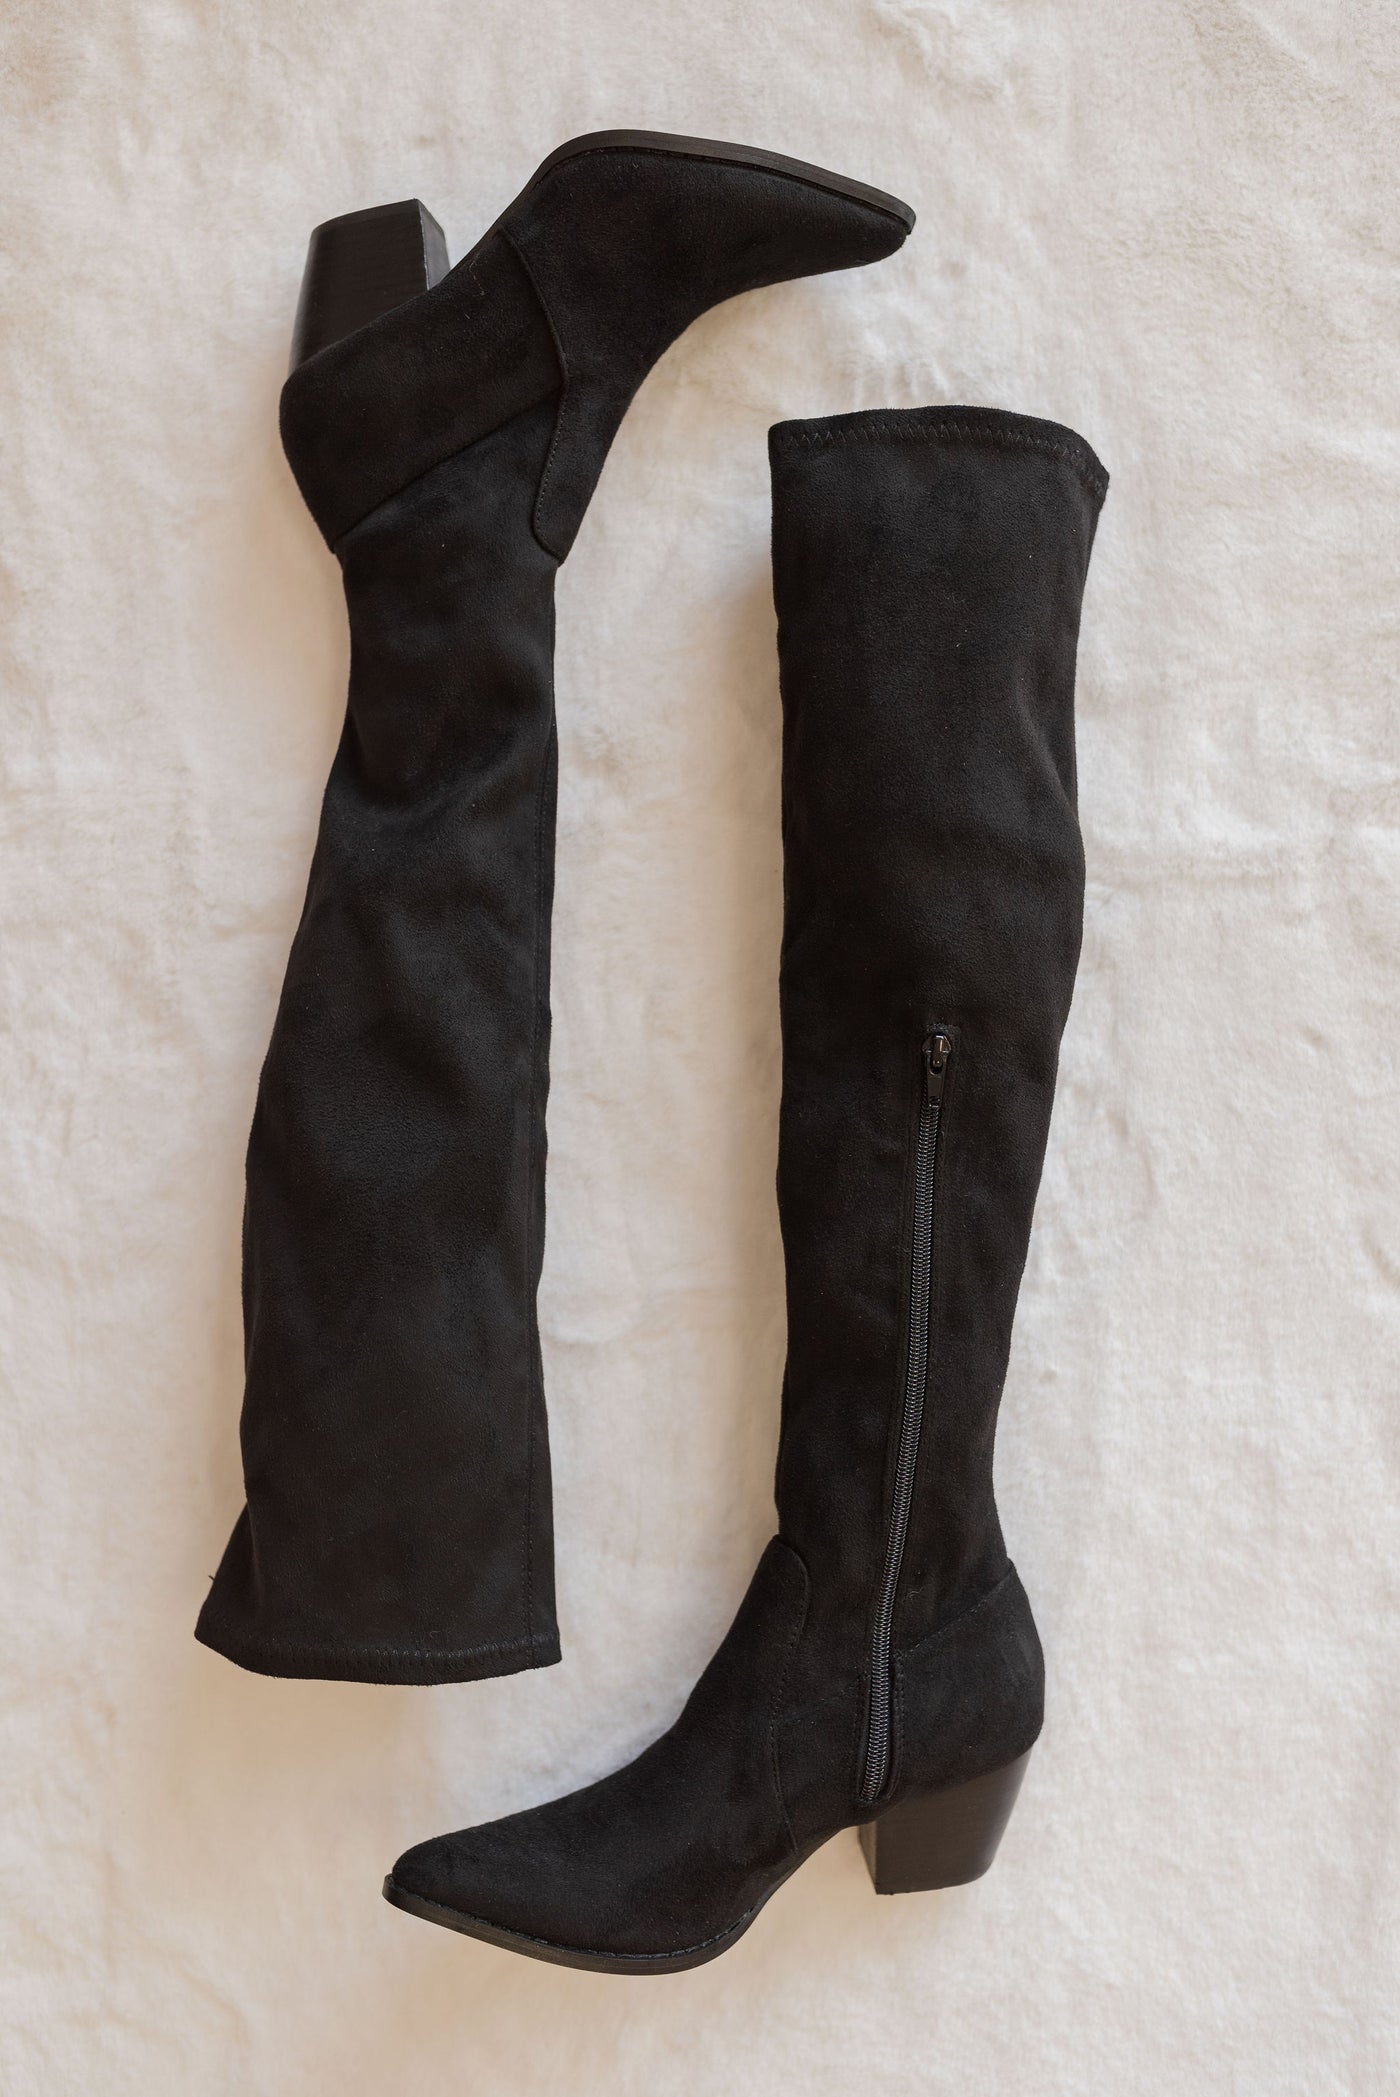 Matisse | Broadway Over-the-Knee Boot | Black - Poppy and Stella